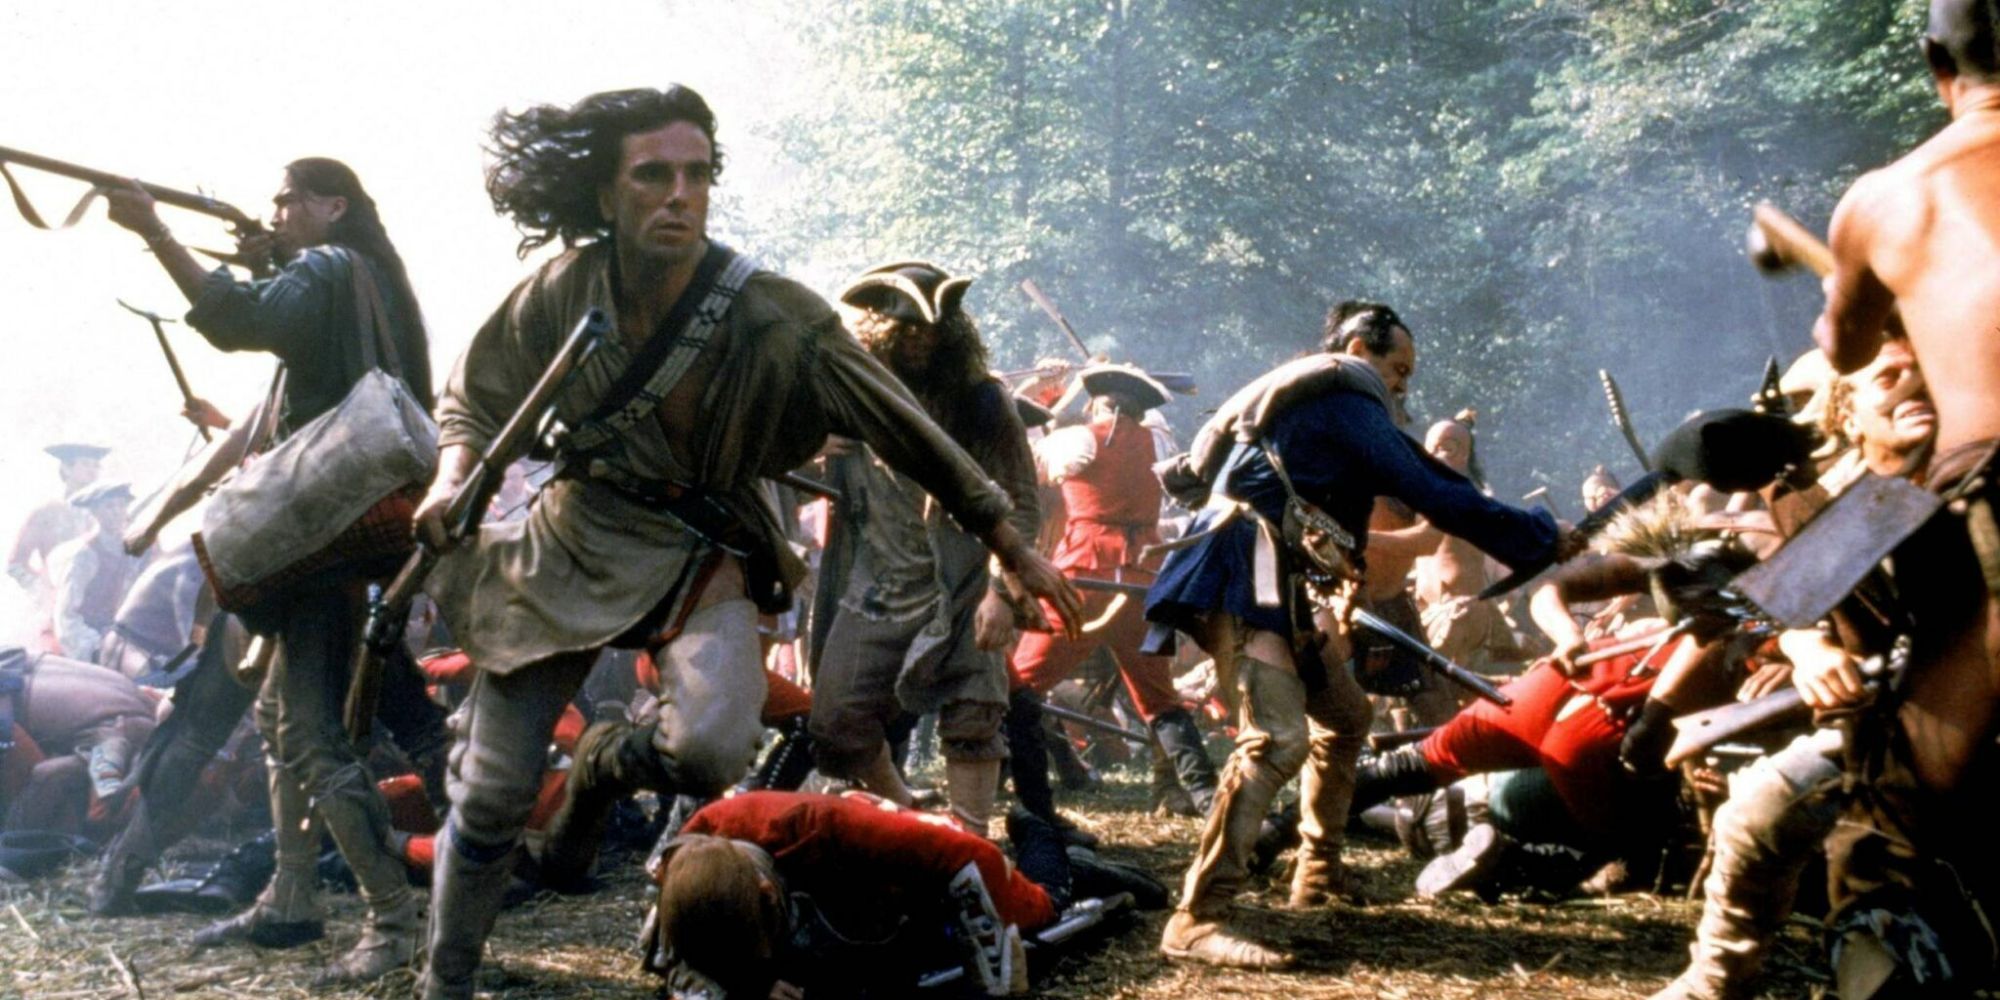 Daniel Day-Lewis charging through battle in The Last Of The Mohicans